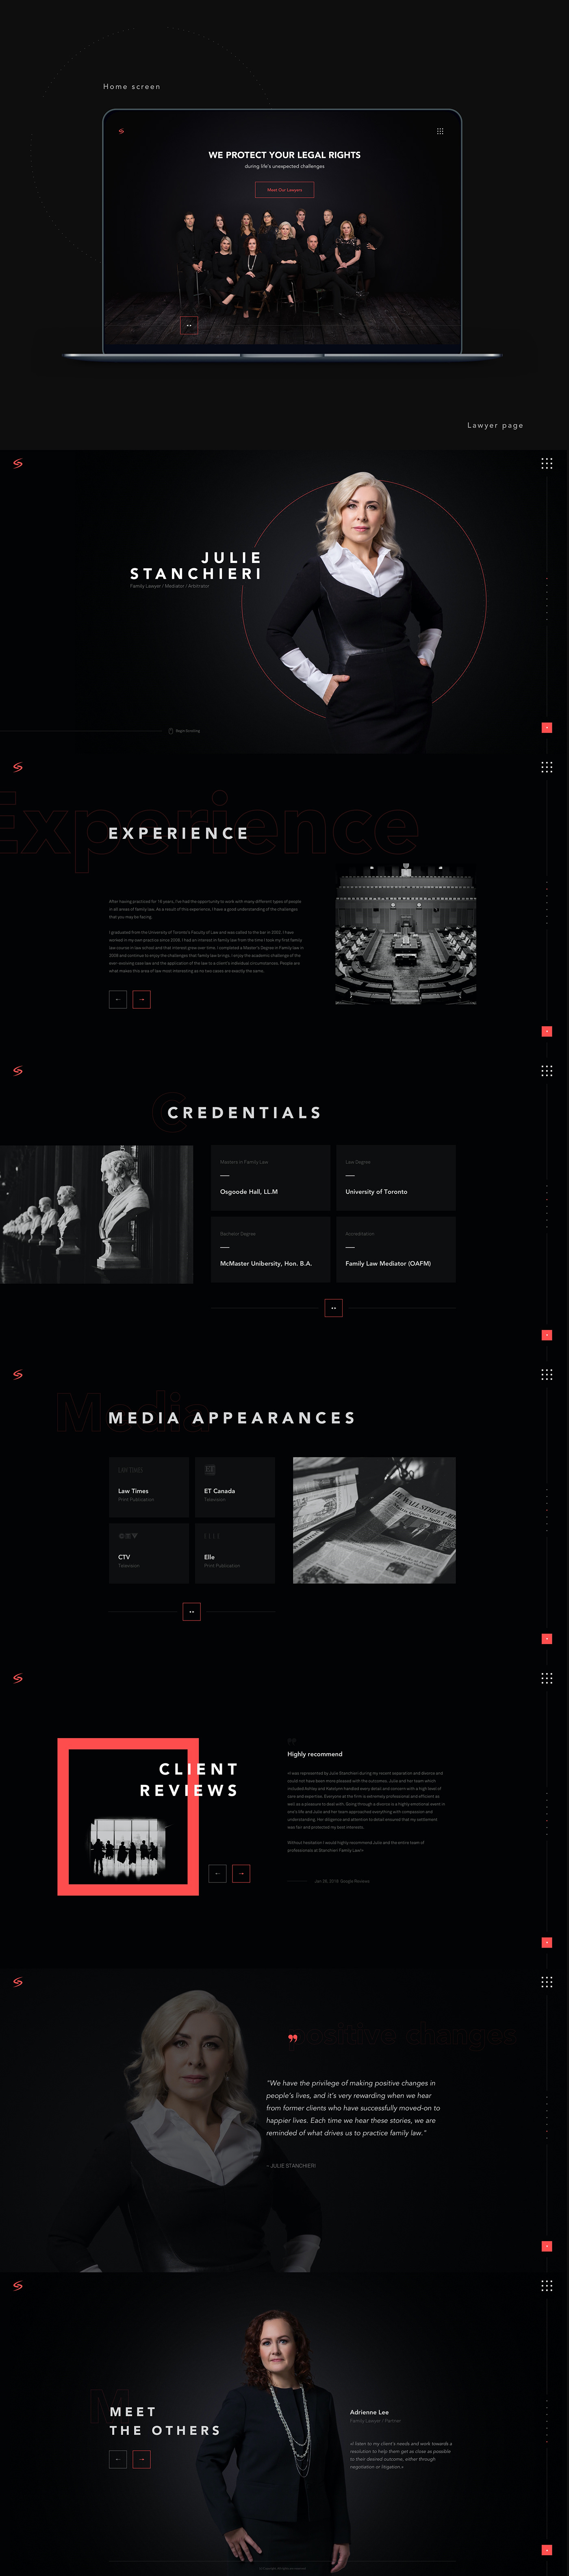 advocacy court dark theme Justice landing page law law firm lawyer team ux/ui